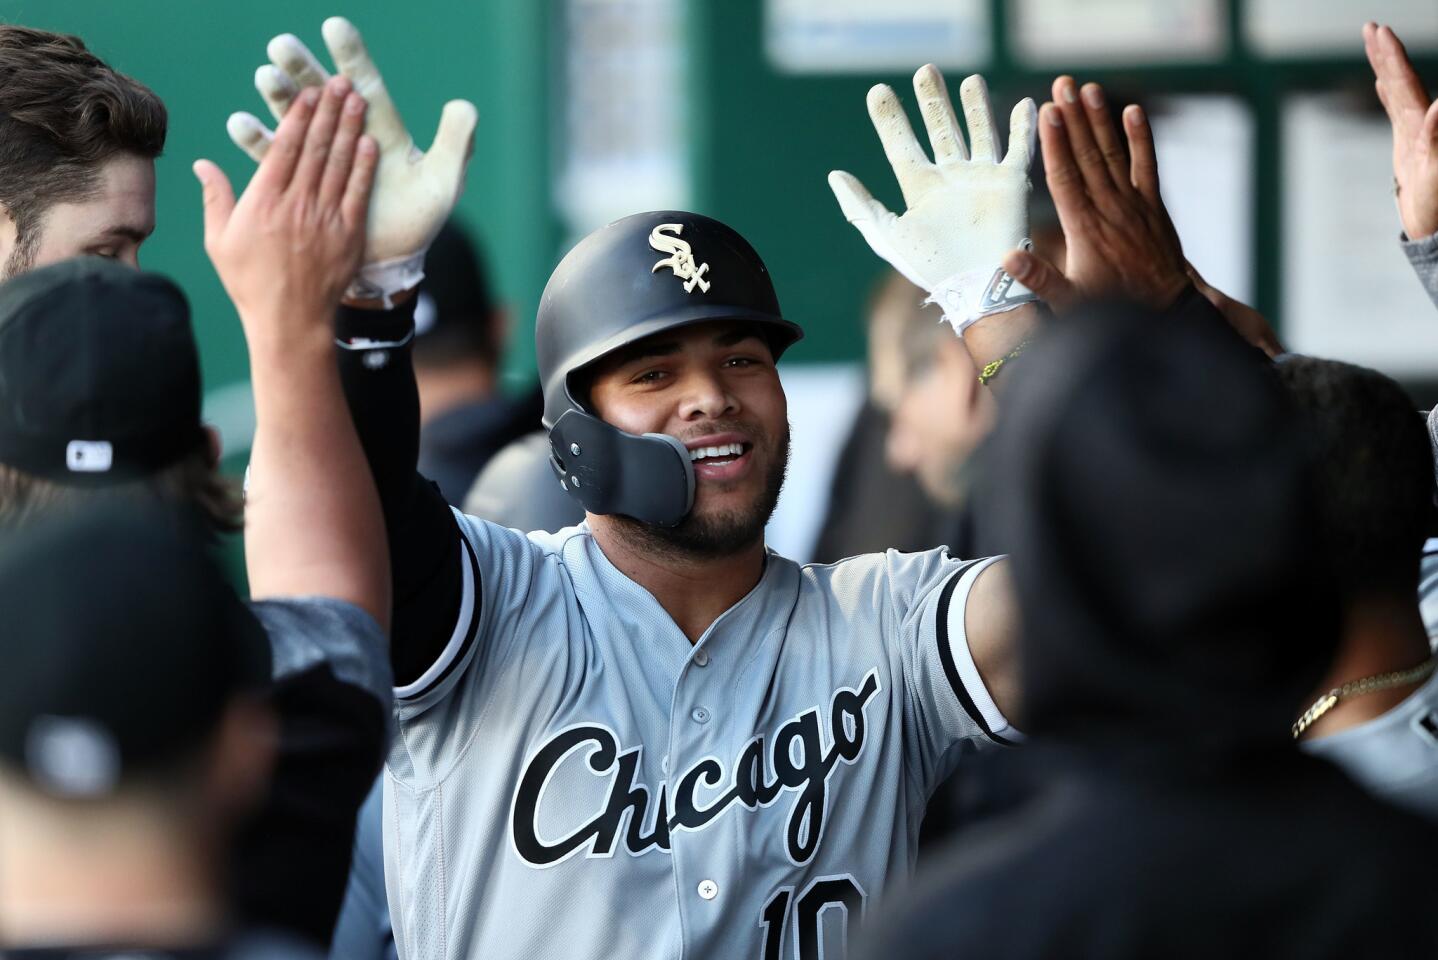 White Sox second baseman Yoan Moncada is congratulated by teammates in the dugout after hitting a home run during the first inning against the Royals at Kauffman Stadium on April 26, 2018 in Kansas City, Mo.